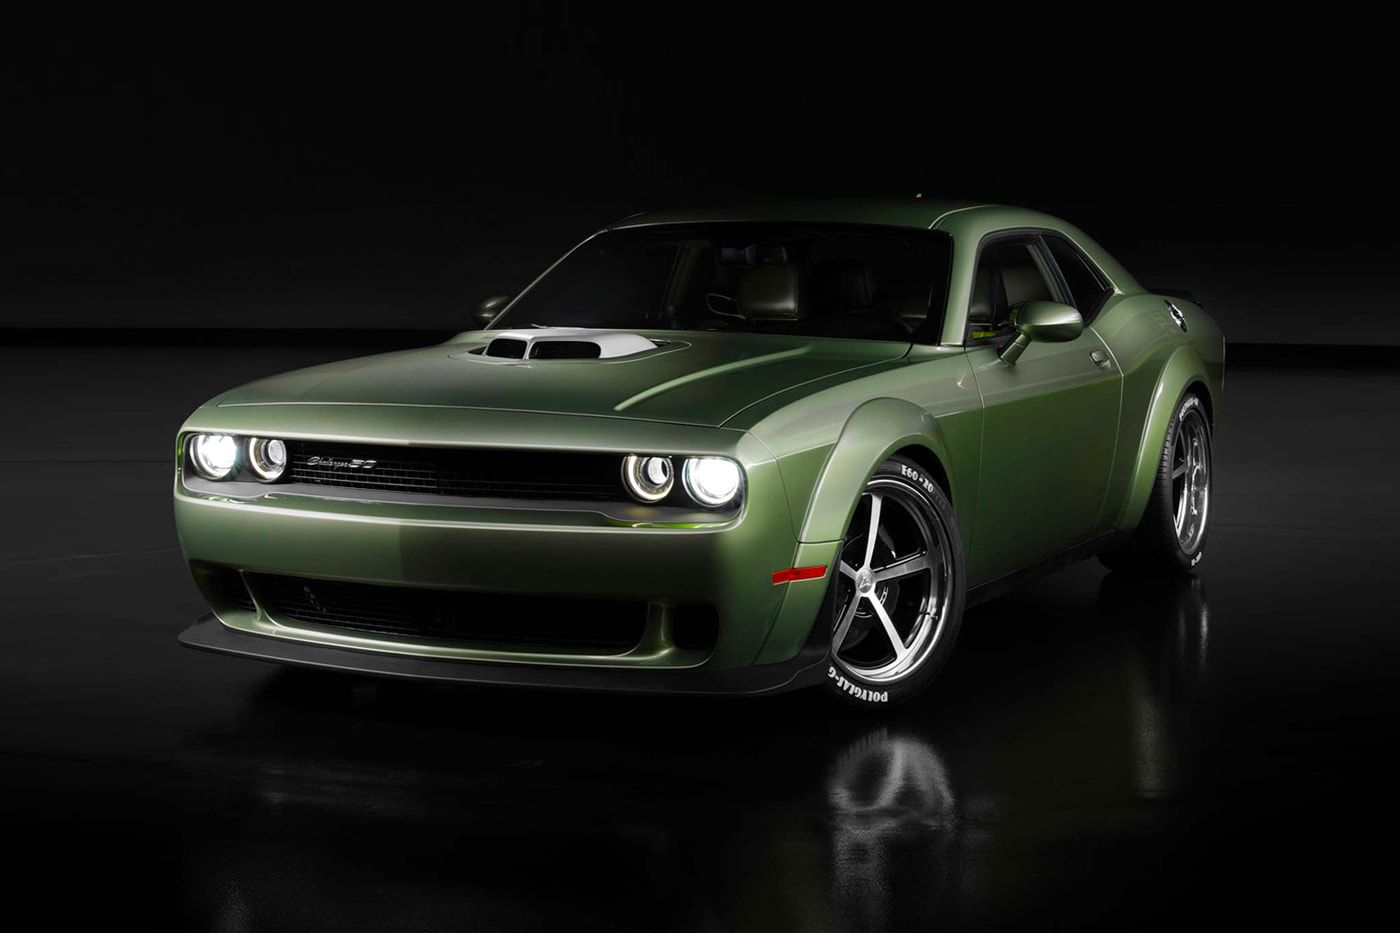 Meet the Dodge Challenger Holy Guacamole Concept  customization of the Challenger R/T Scat Pack Widebody 50th Anniversary edition rotten avocado gold school shaker hood mopar hemi v8 muscle car news